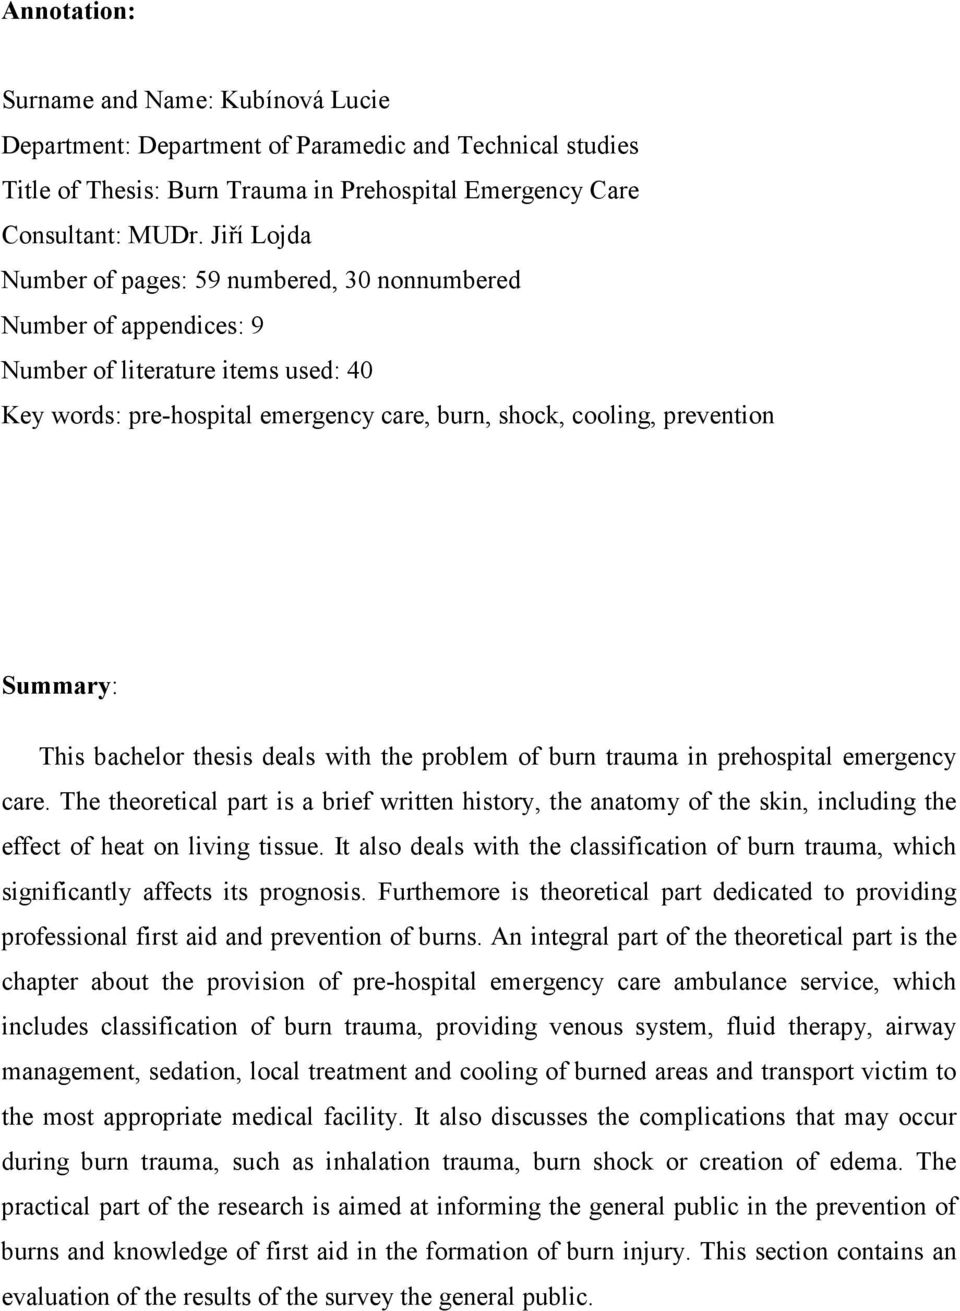 This bachelor thesis deals with the problem of burn trauma in prehospital emergency care.